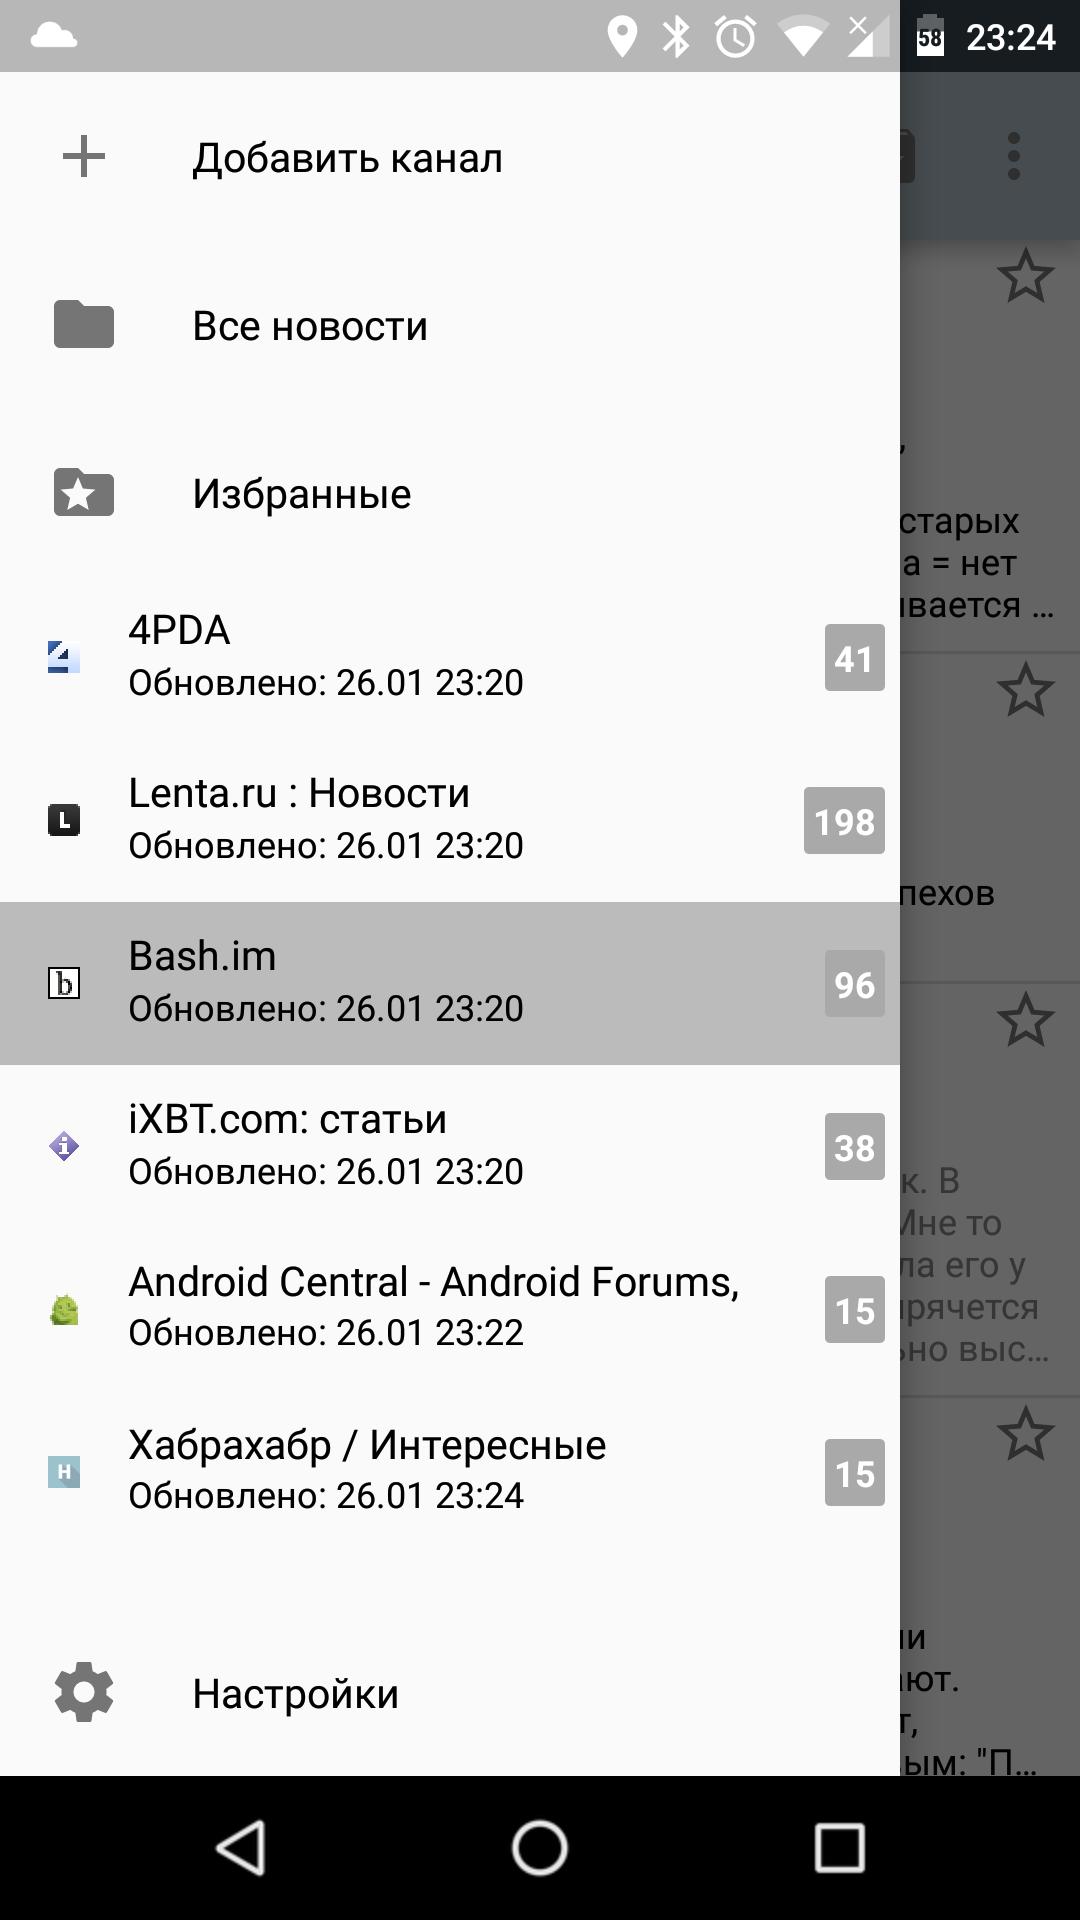 4pda client. RSS Android Reader. Android RSS.